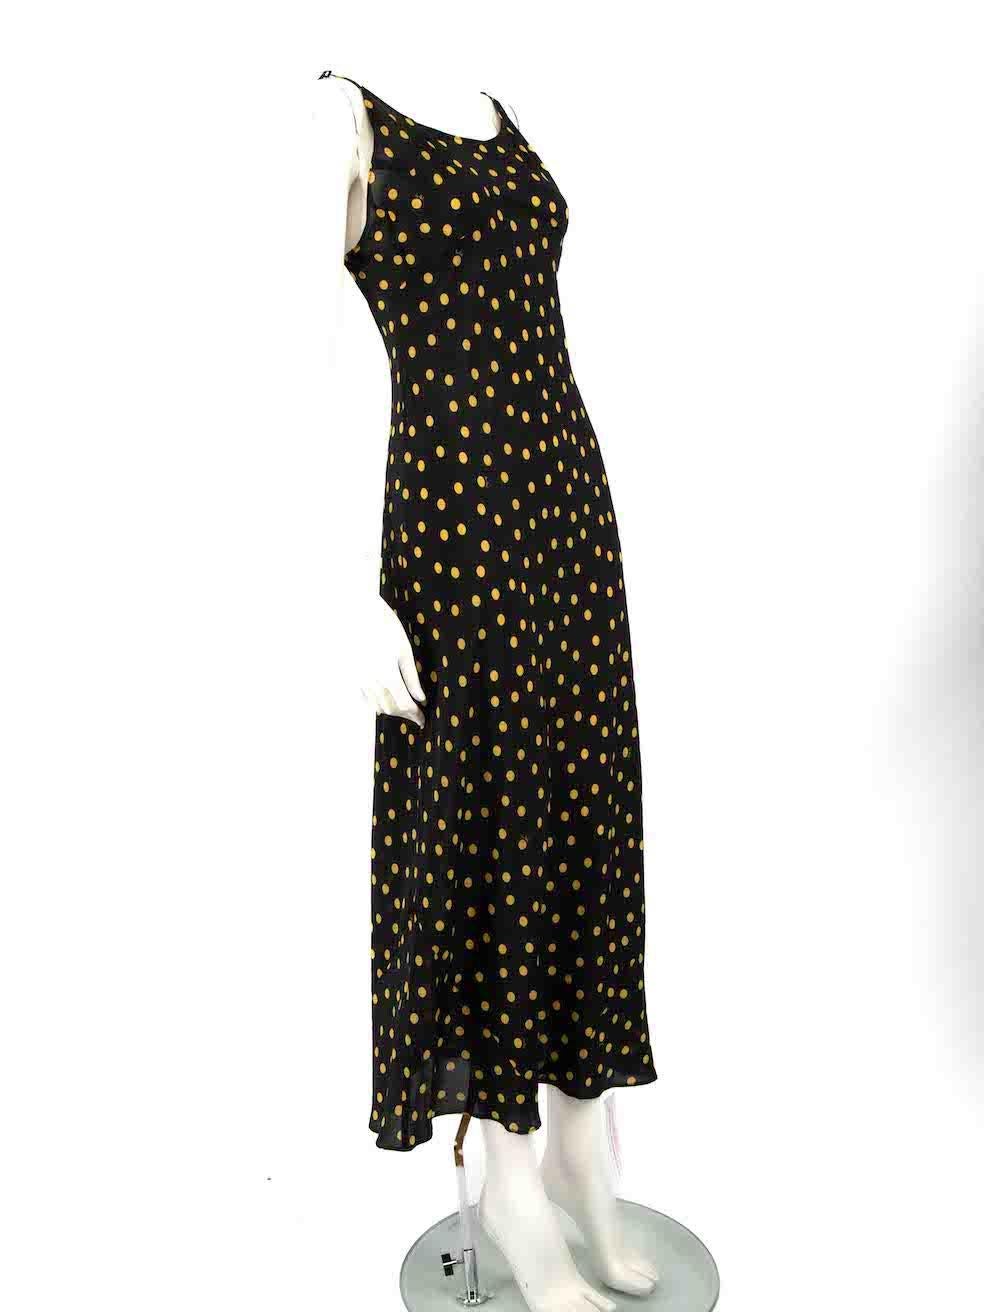 CONDITION is Never worn, with tags. No visible wear to dress is evident on this new Réalisation designer resale item.
 
 
 
 Details
 
 
 Model: The Iggy
 
 Black
 
 Silk
 
 Slip dress
 
 Yellow polkadot pattern
 
 Sleeveless
 
 Midi
 
 Adjustable